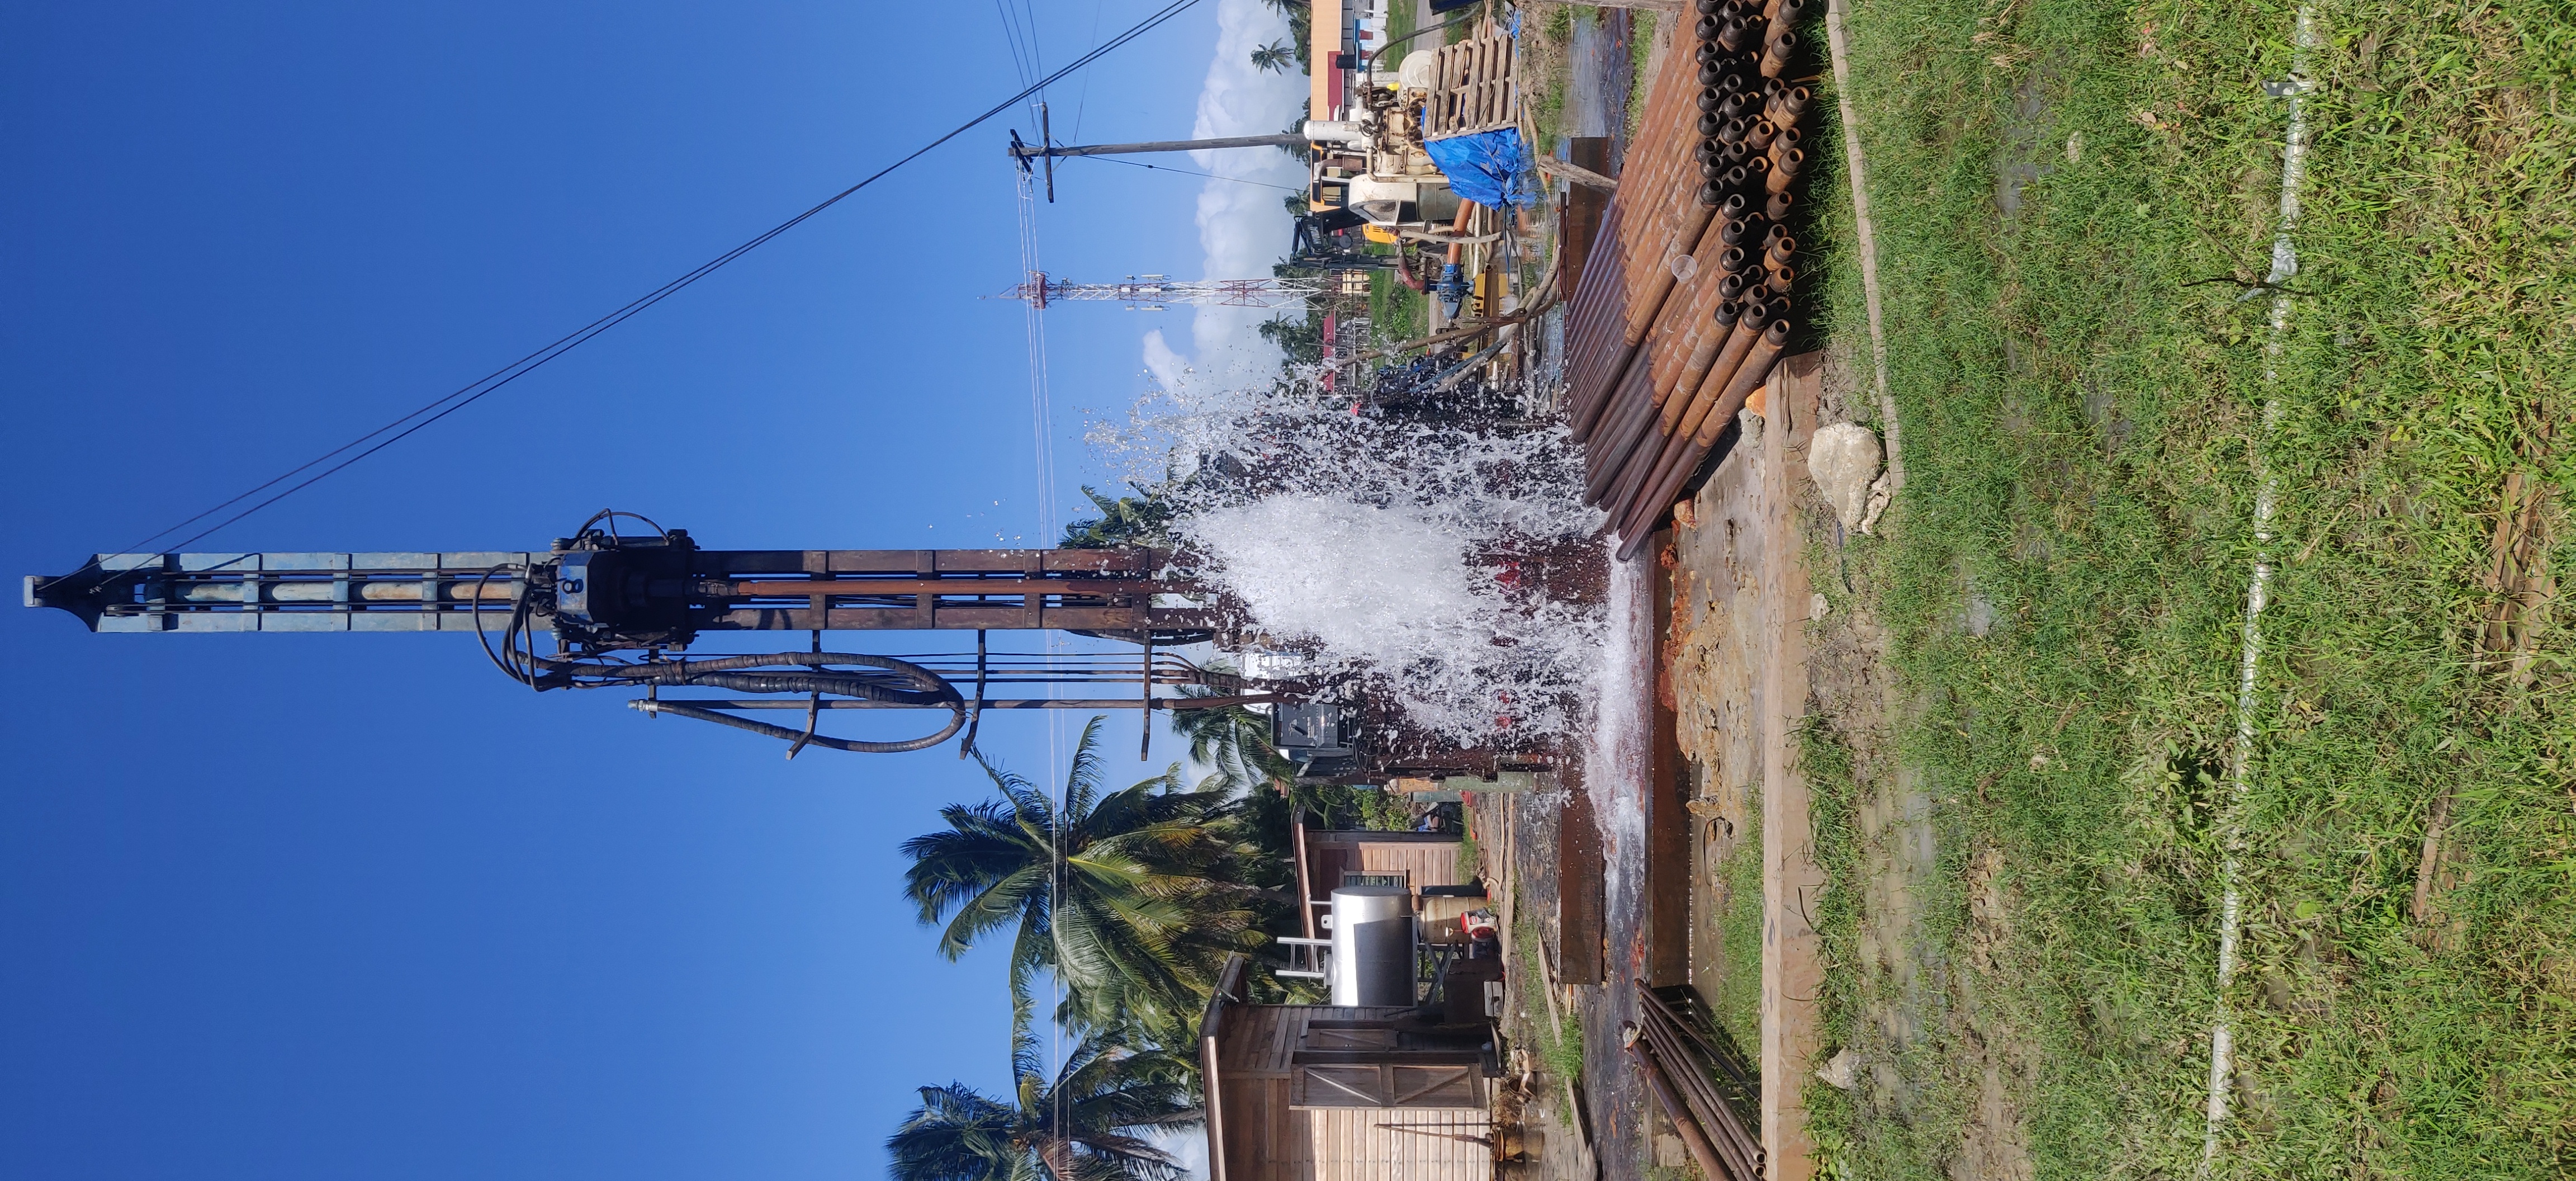 New Chesney, Berbice well to serve 12,000